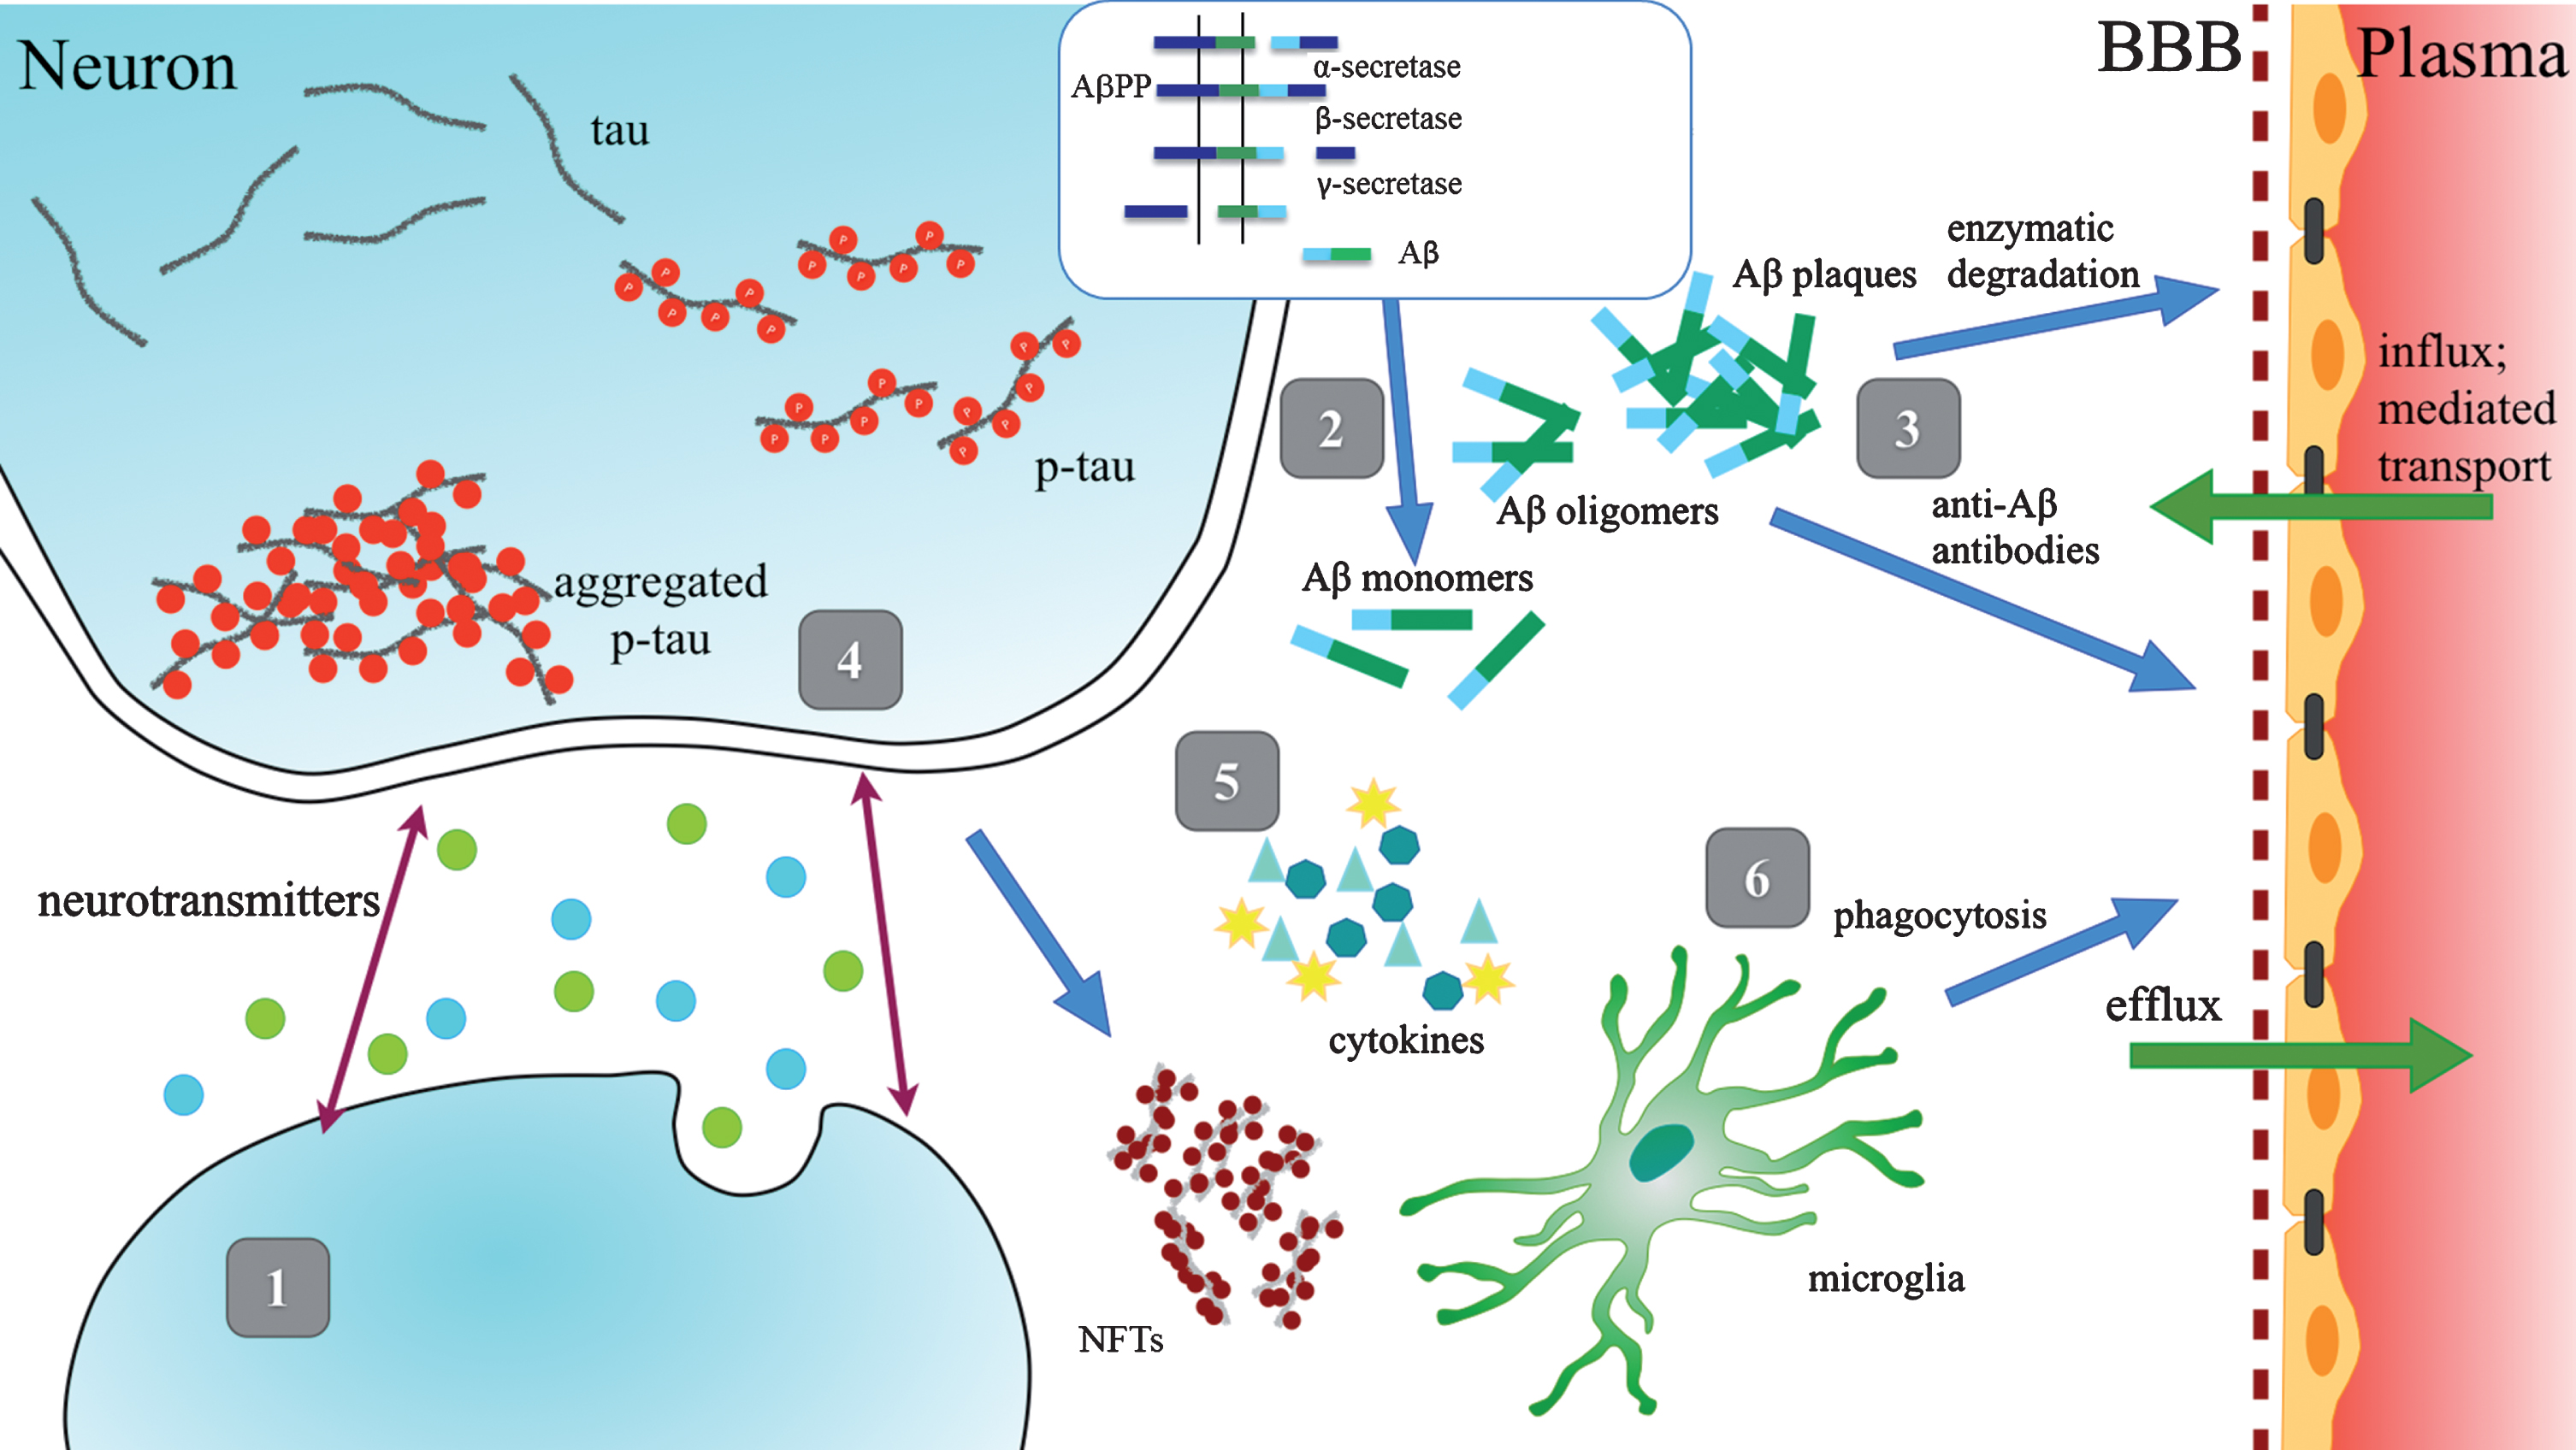 Schematic Representation of Therapeutic Strategies. 1) Enhancement of neurotransmission; 2) Reduction of Aβ production and aggregation; 3) Enhancement of Aβ clearance; 4) Prevention of tau aggregation; 5) Anti-inflammatory agents; 6) Enhancement of microglial phagocytosis.